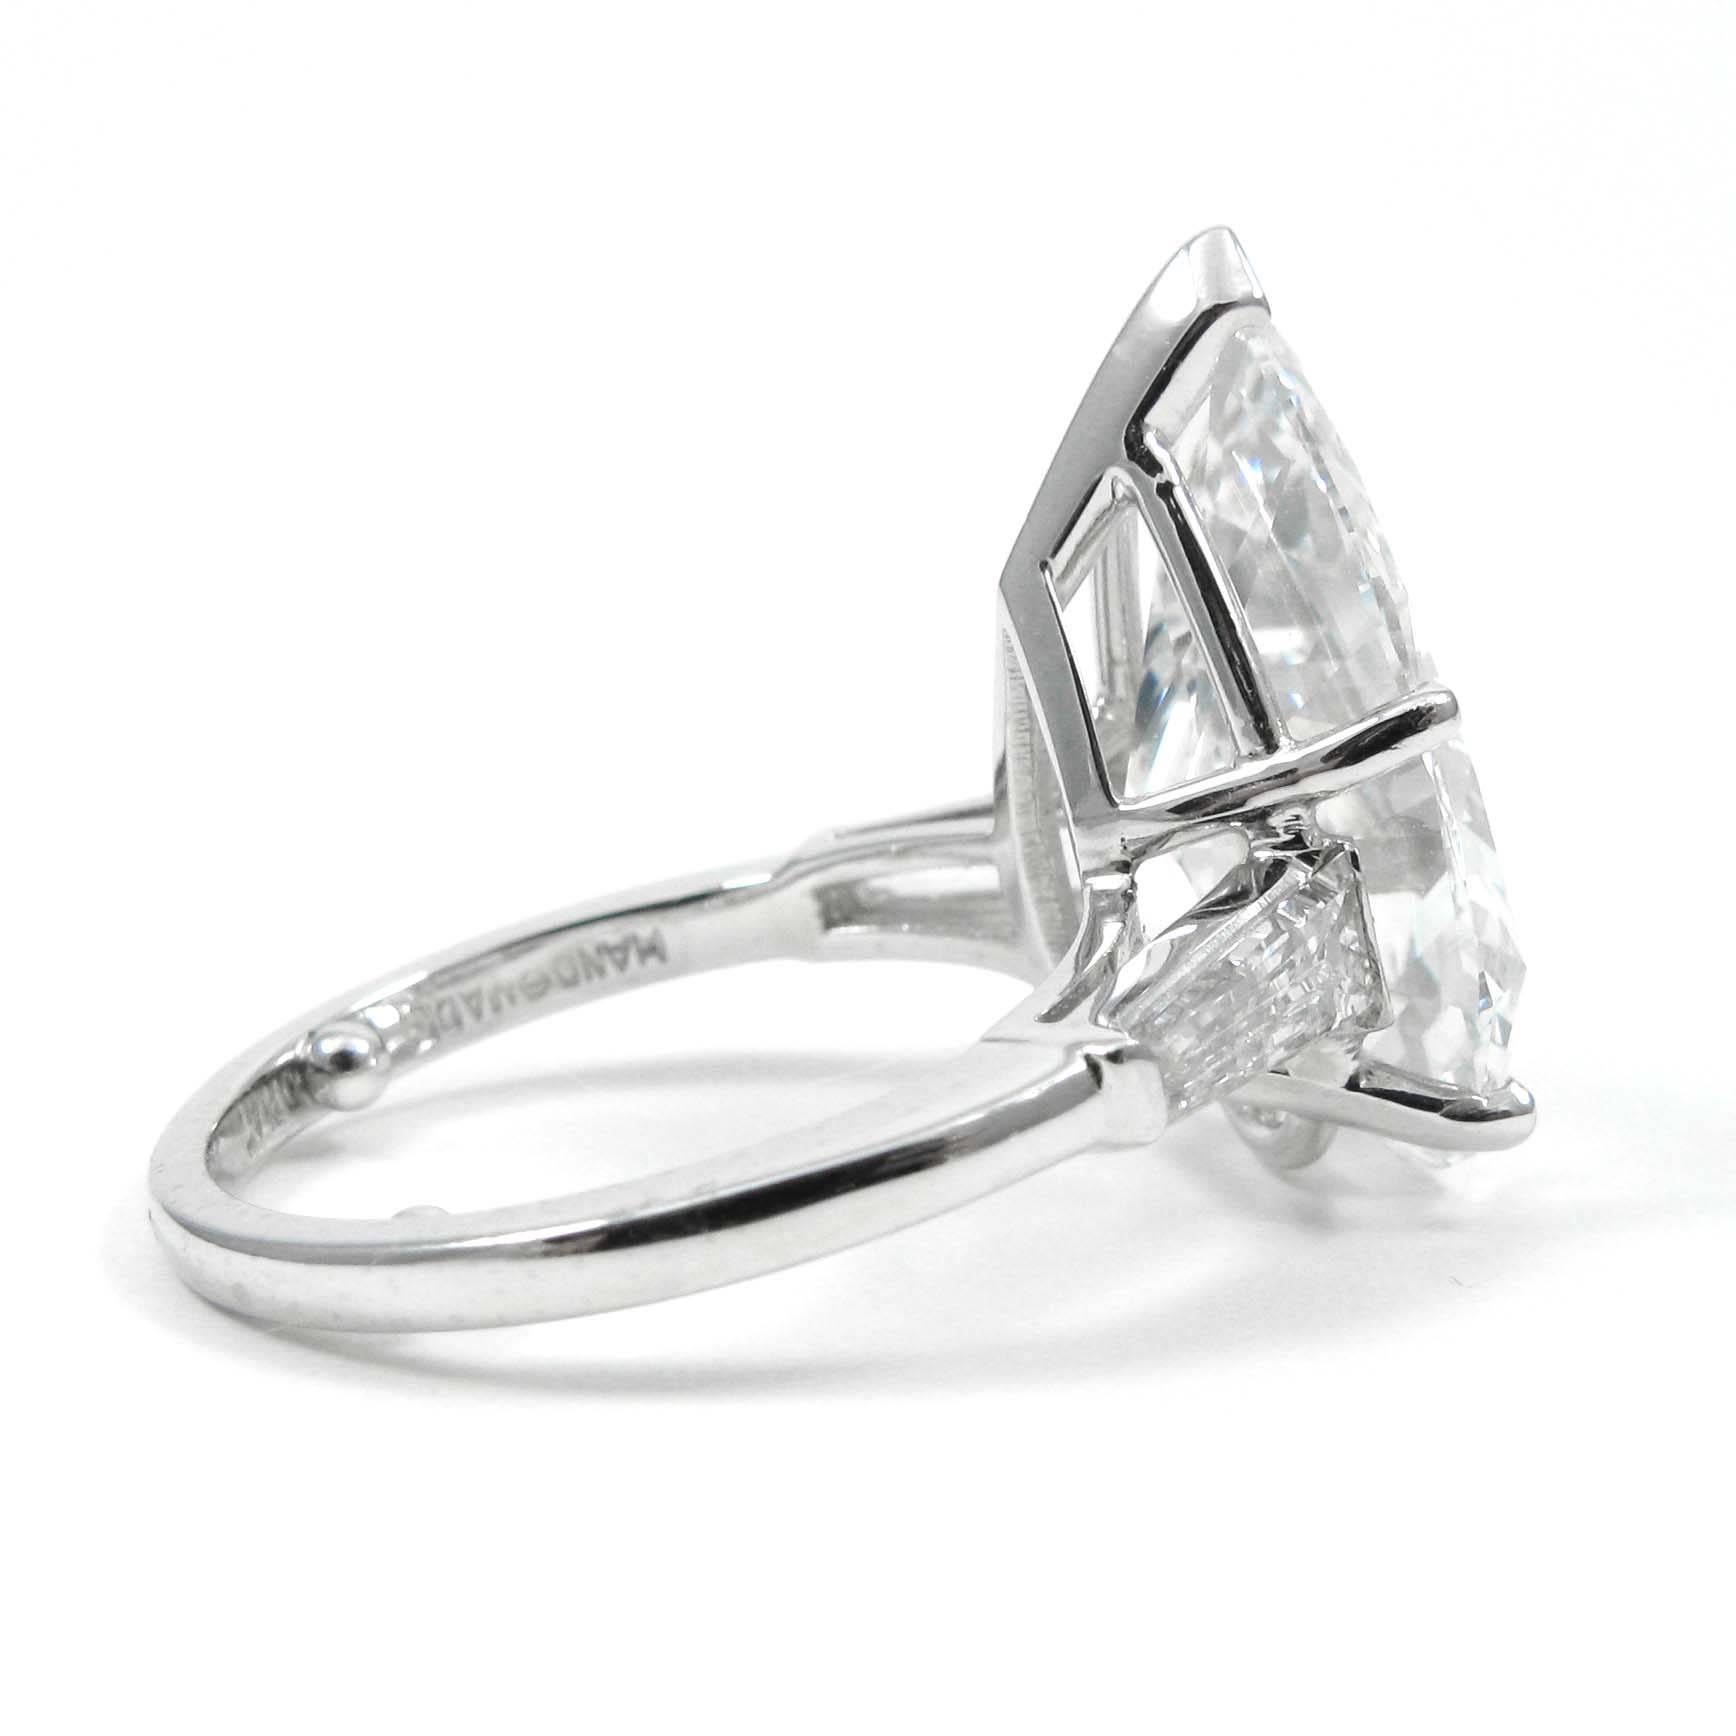 GIA Certified 8.14 Carat Pear Shape Diamond G VS2 Platinum Ring by J Birnbach In Excellent Condition In New York, NY